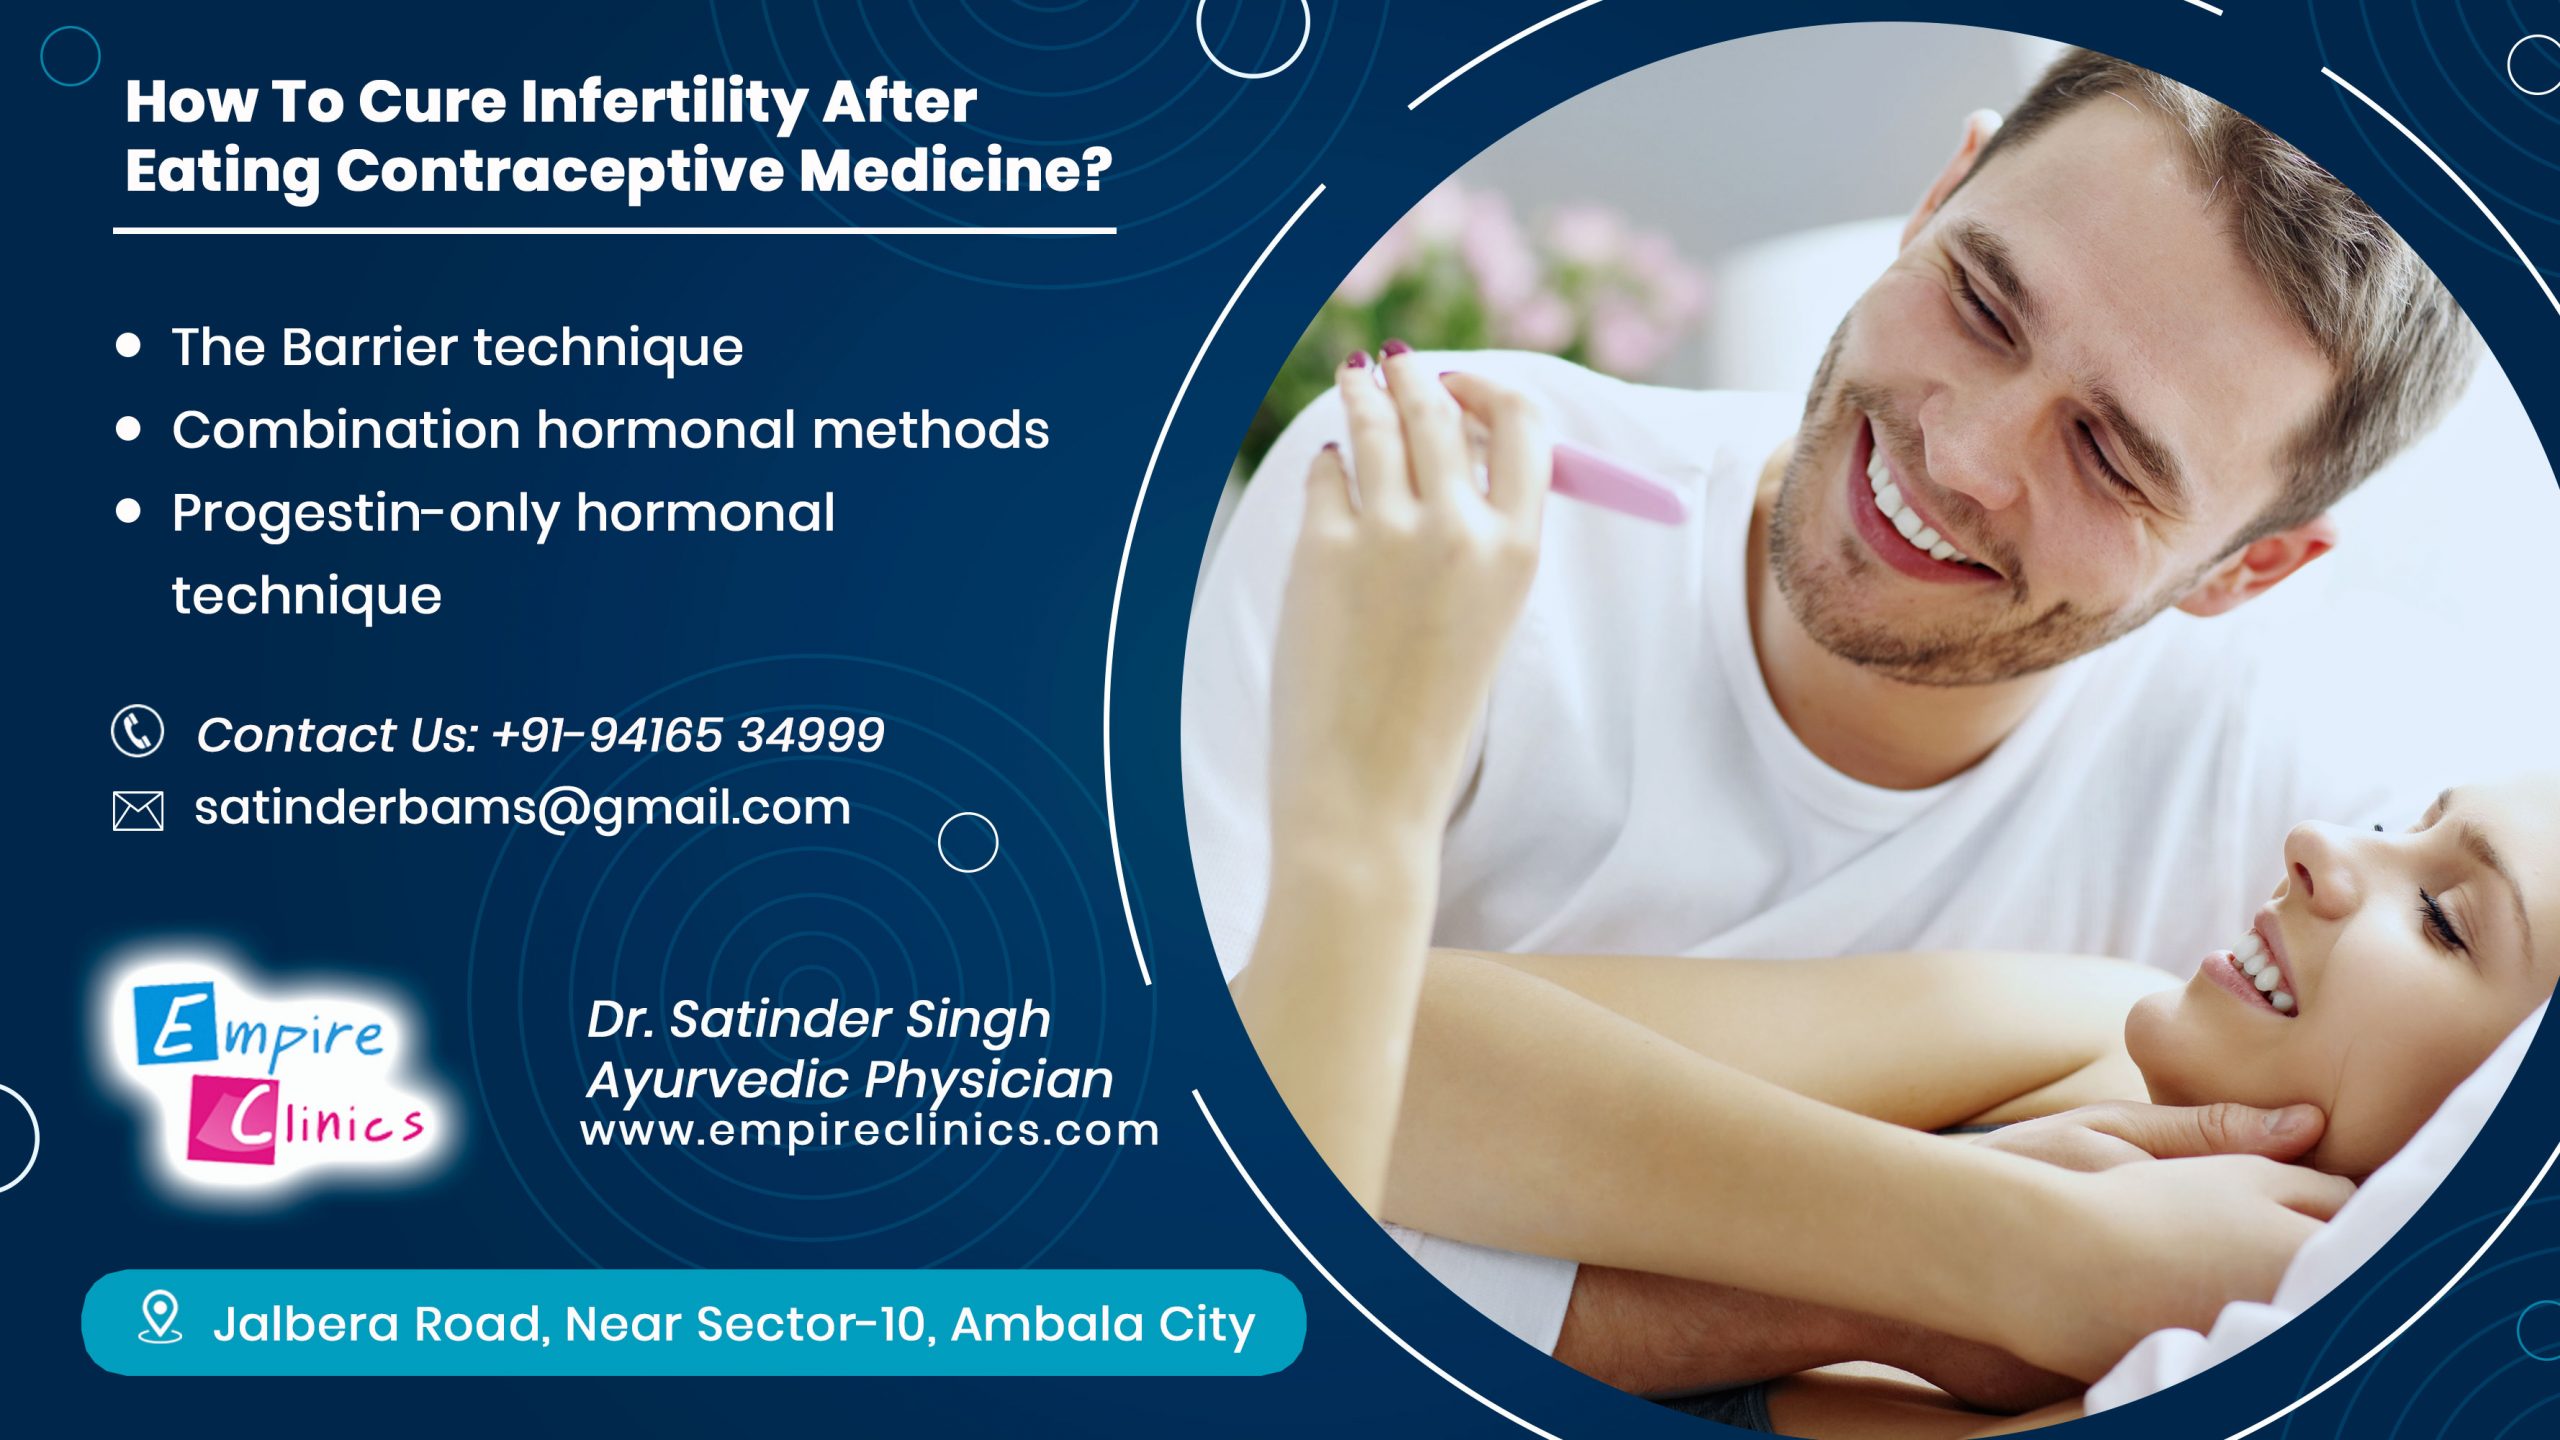 How To Cure Infertility After Eating Contraceptive Medicine?